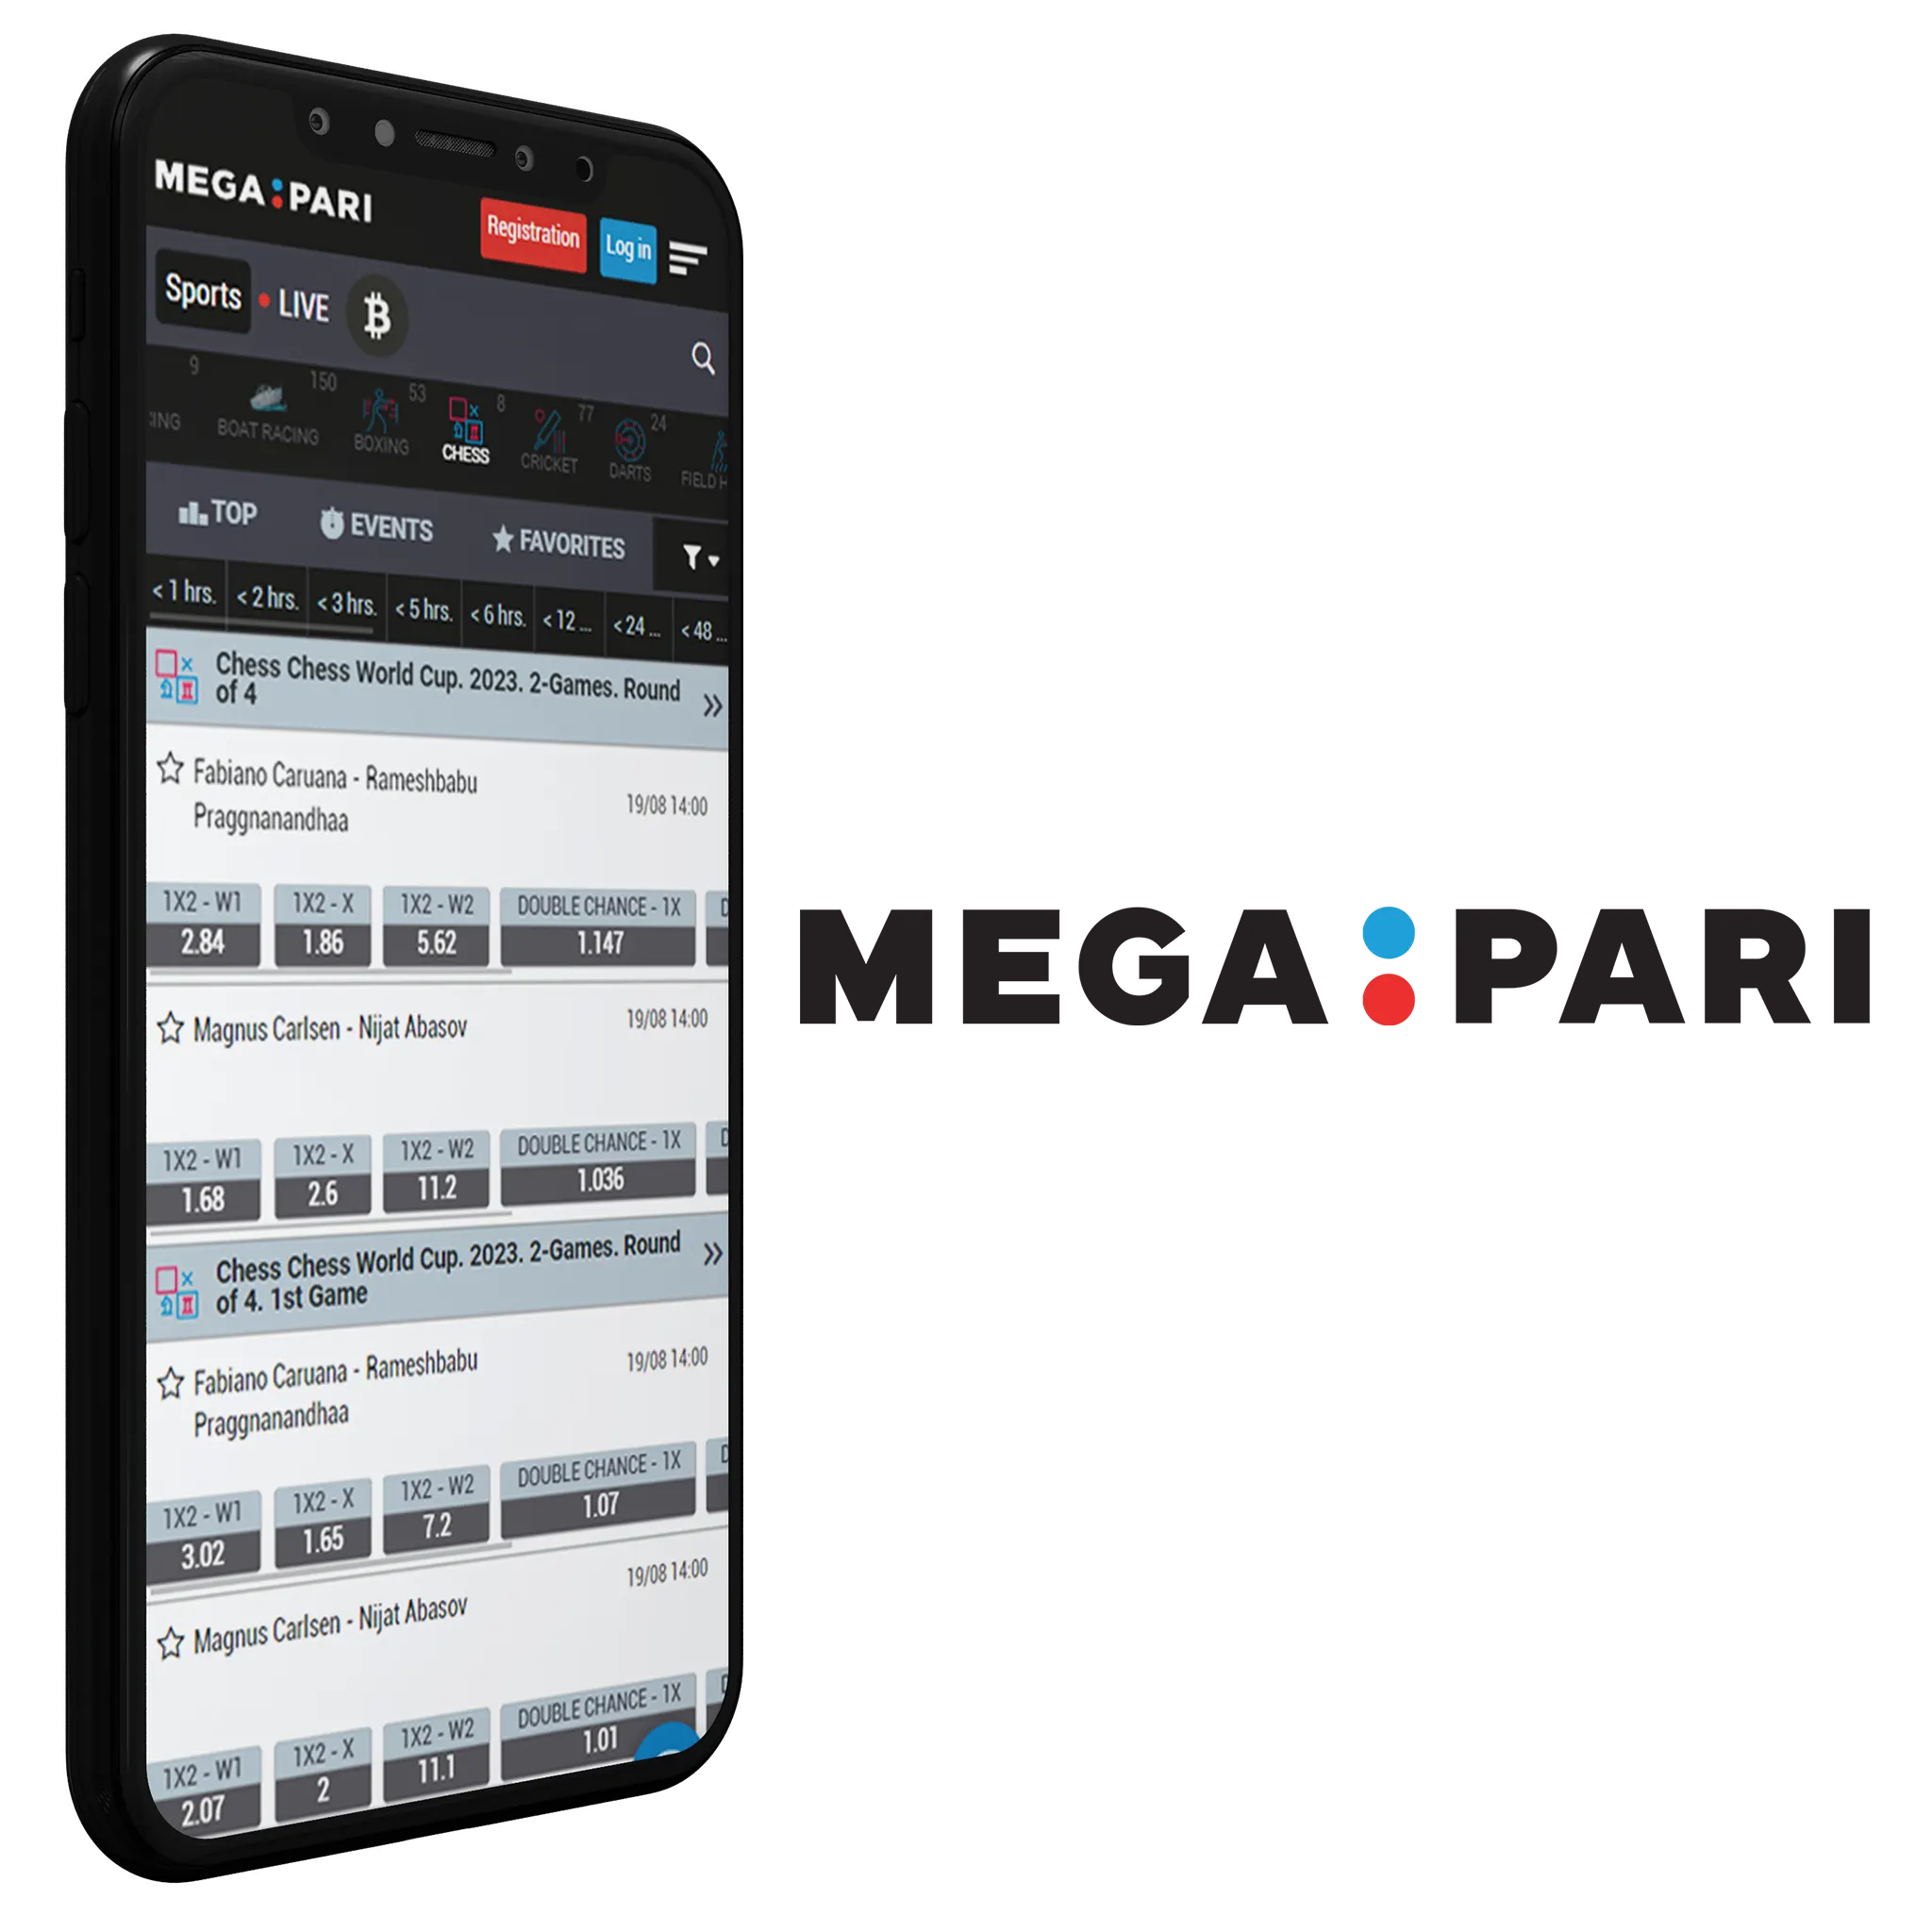 You can download and install the Megapari app on Android and iOS for online chess betting.